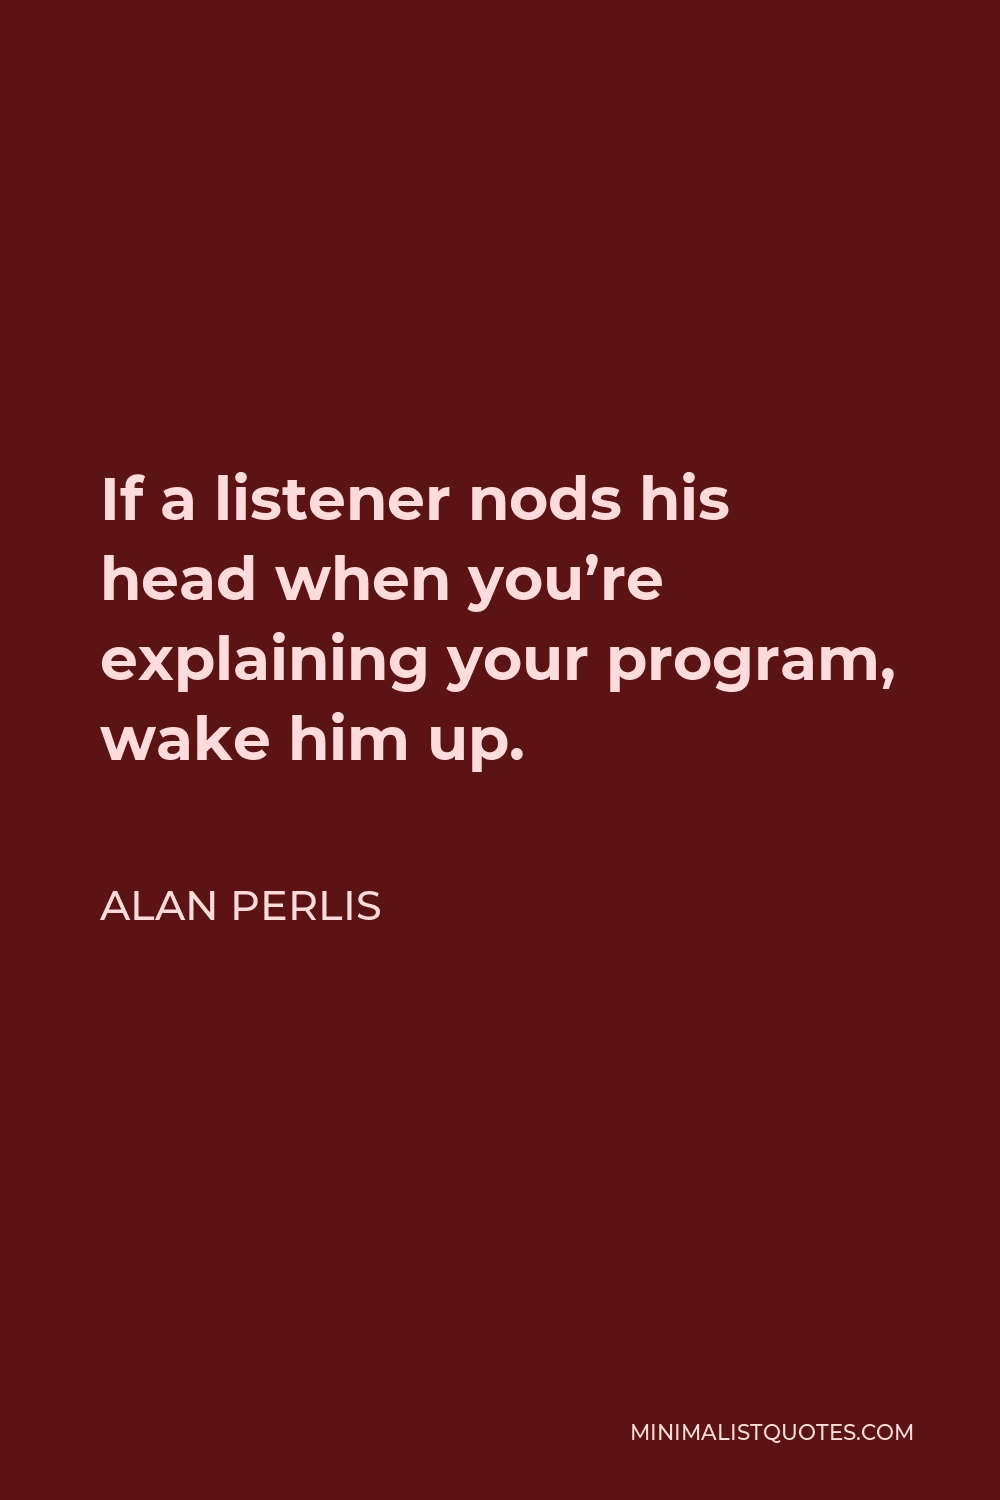 Alan Perlis Quote - If a listener nods his head when you’re explaining your program, wake him up.